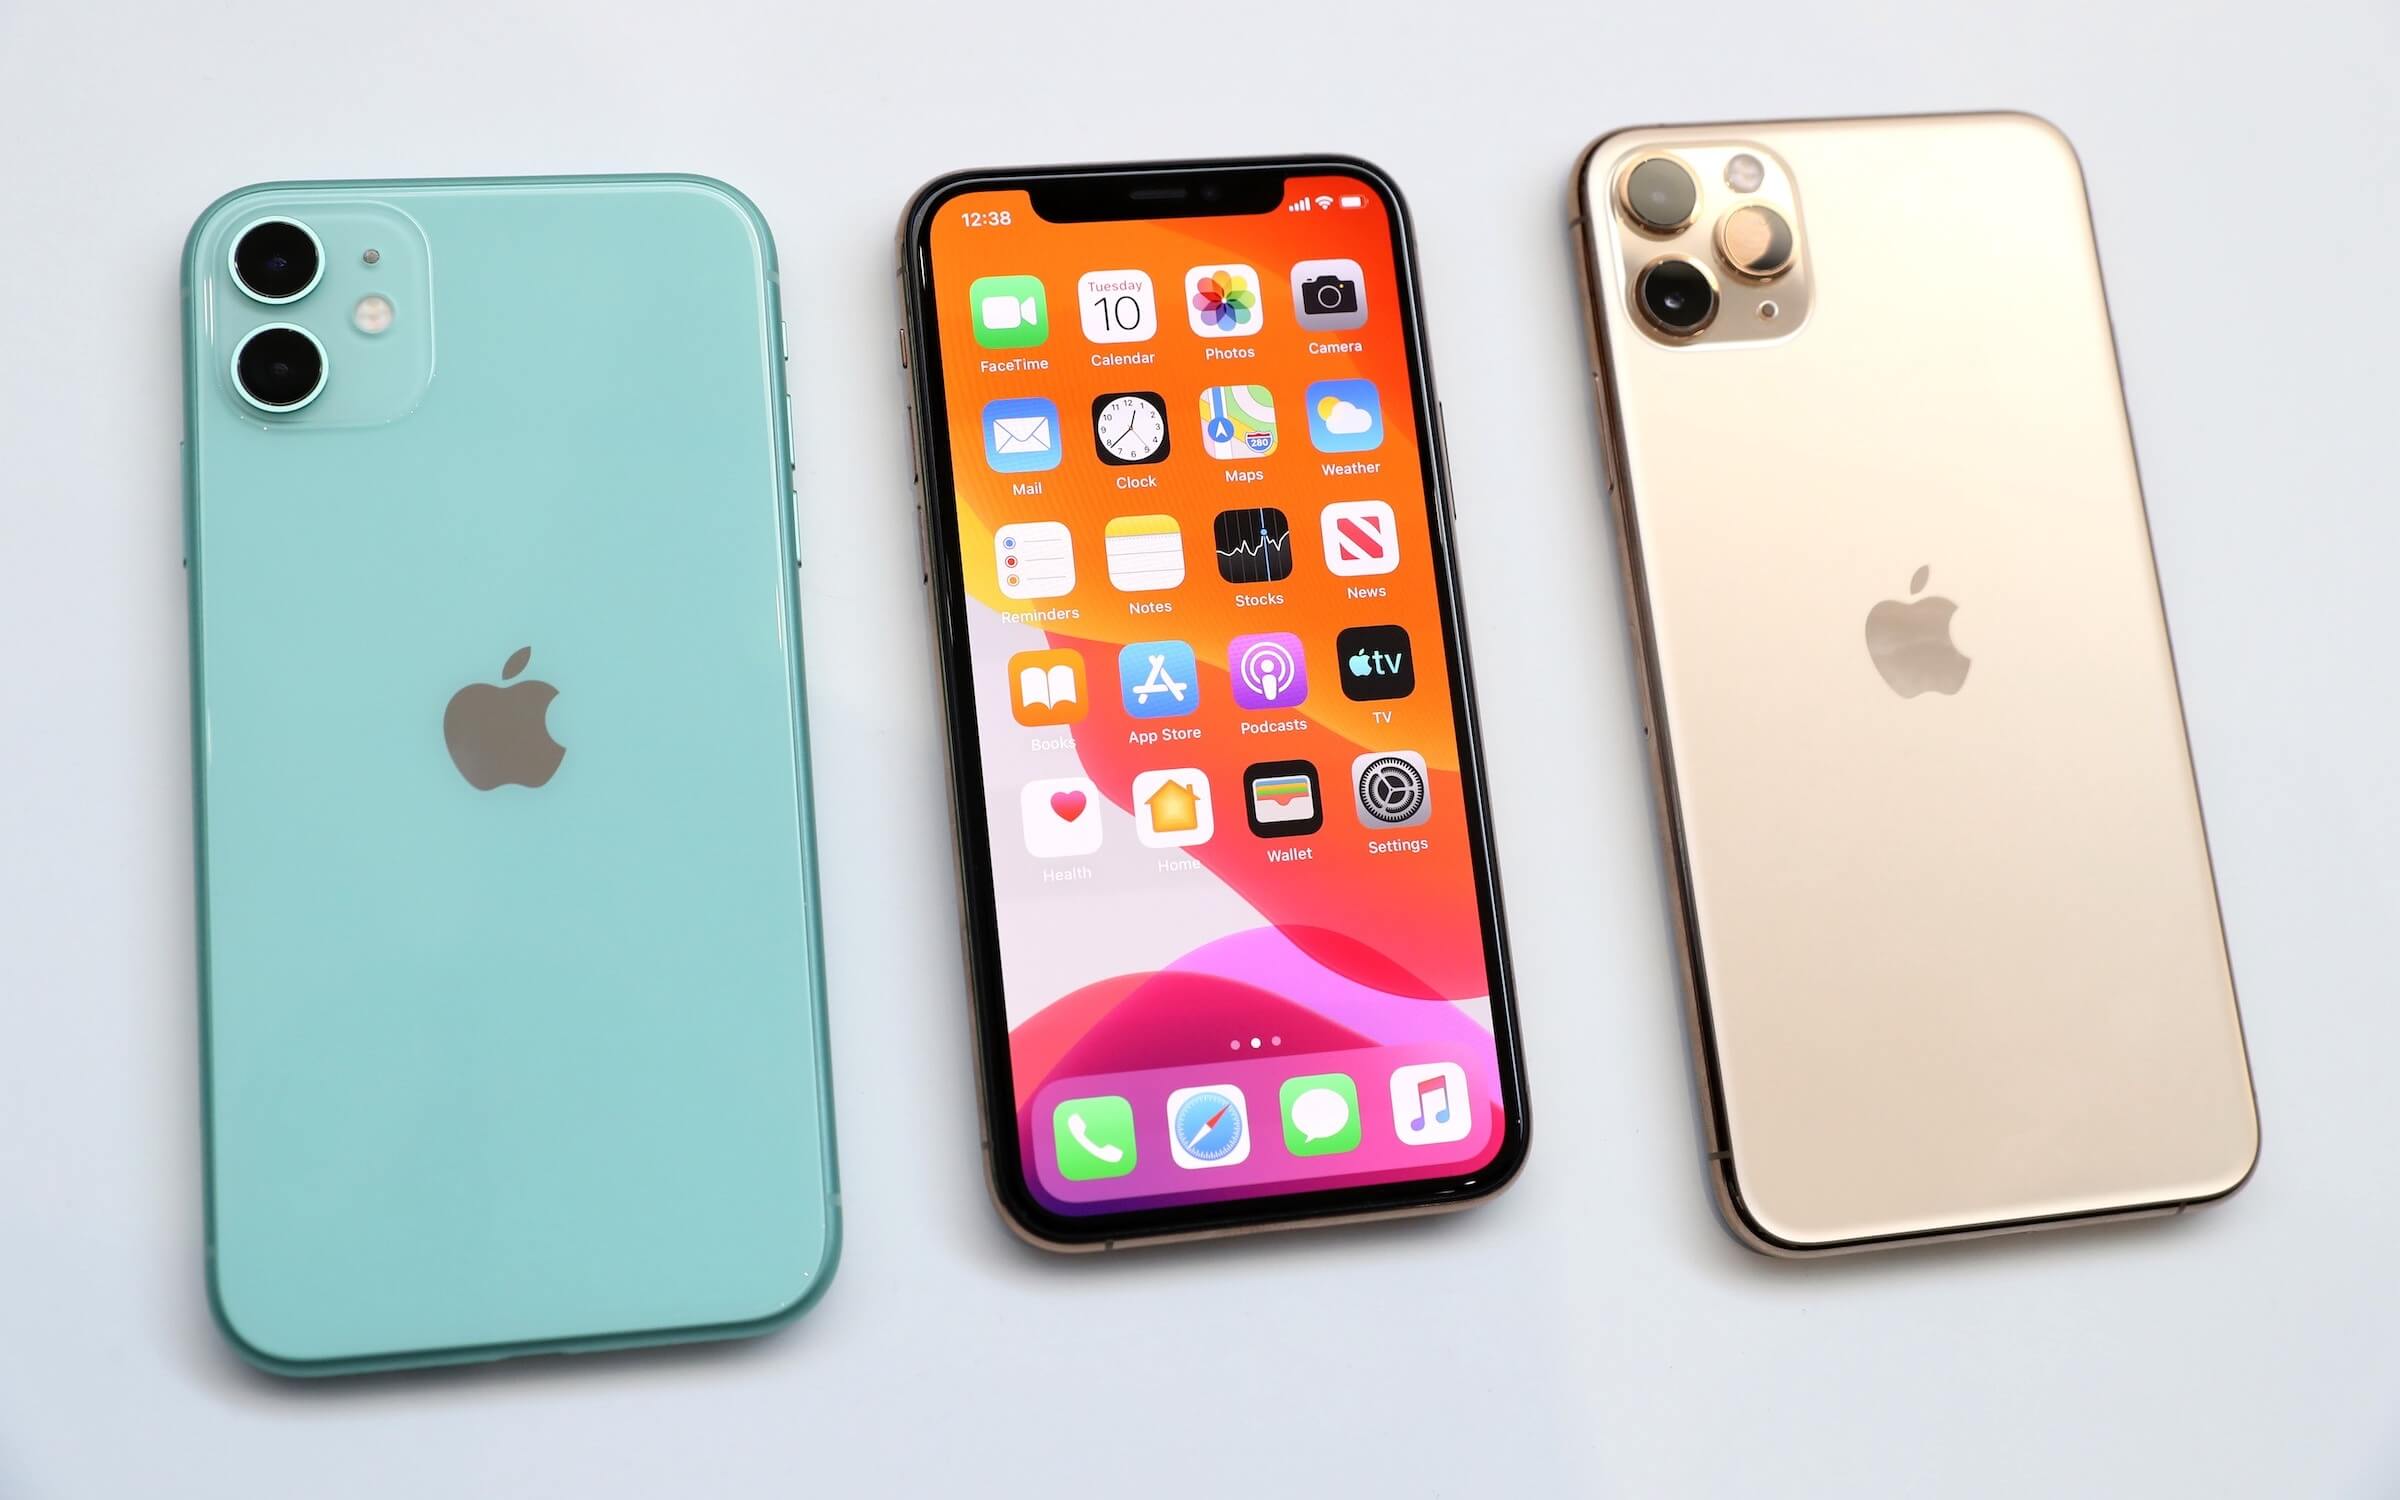 iPhone 11 and iPhone 11 Pro Max